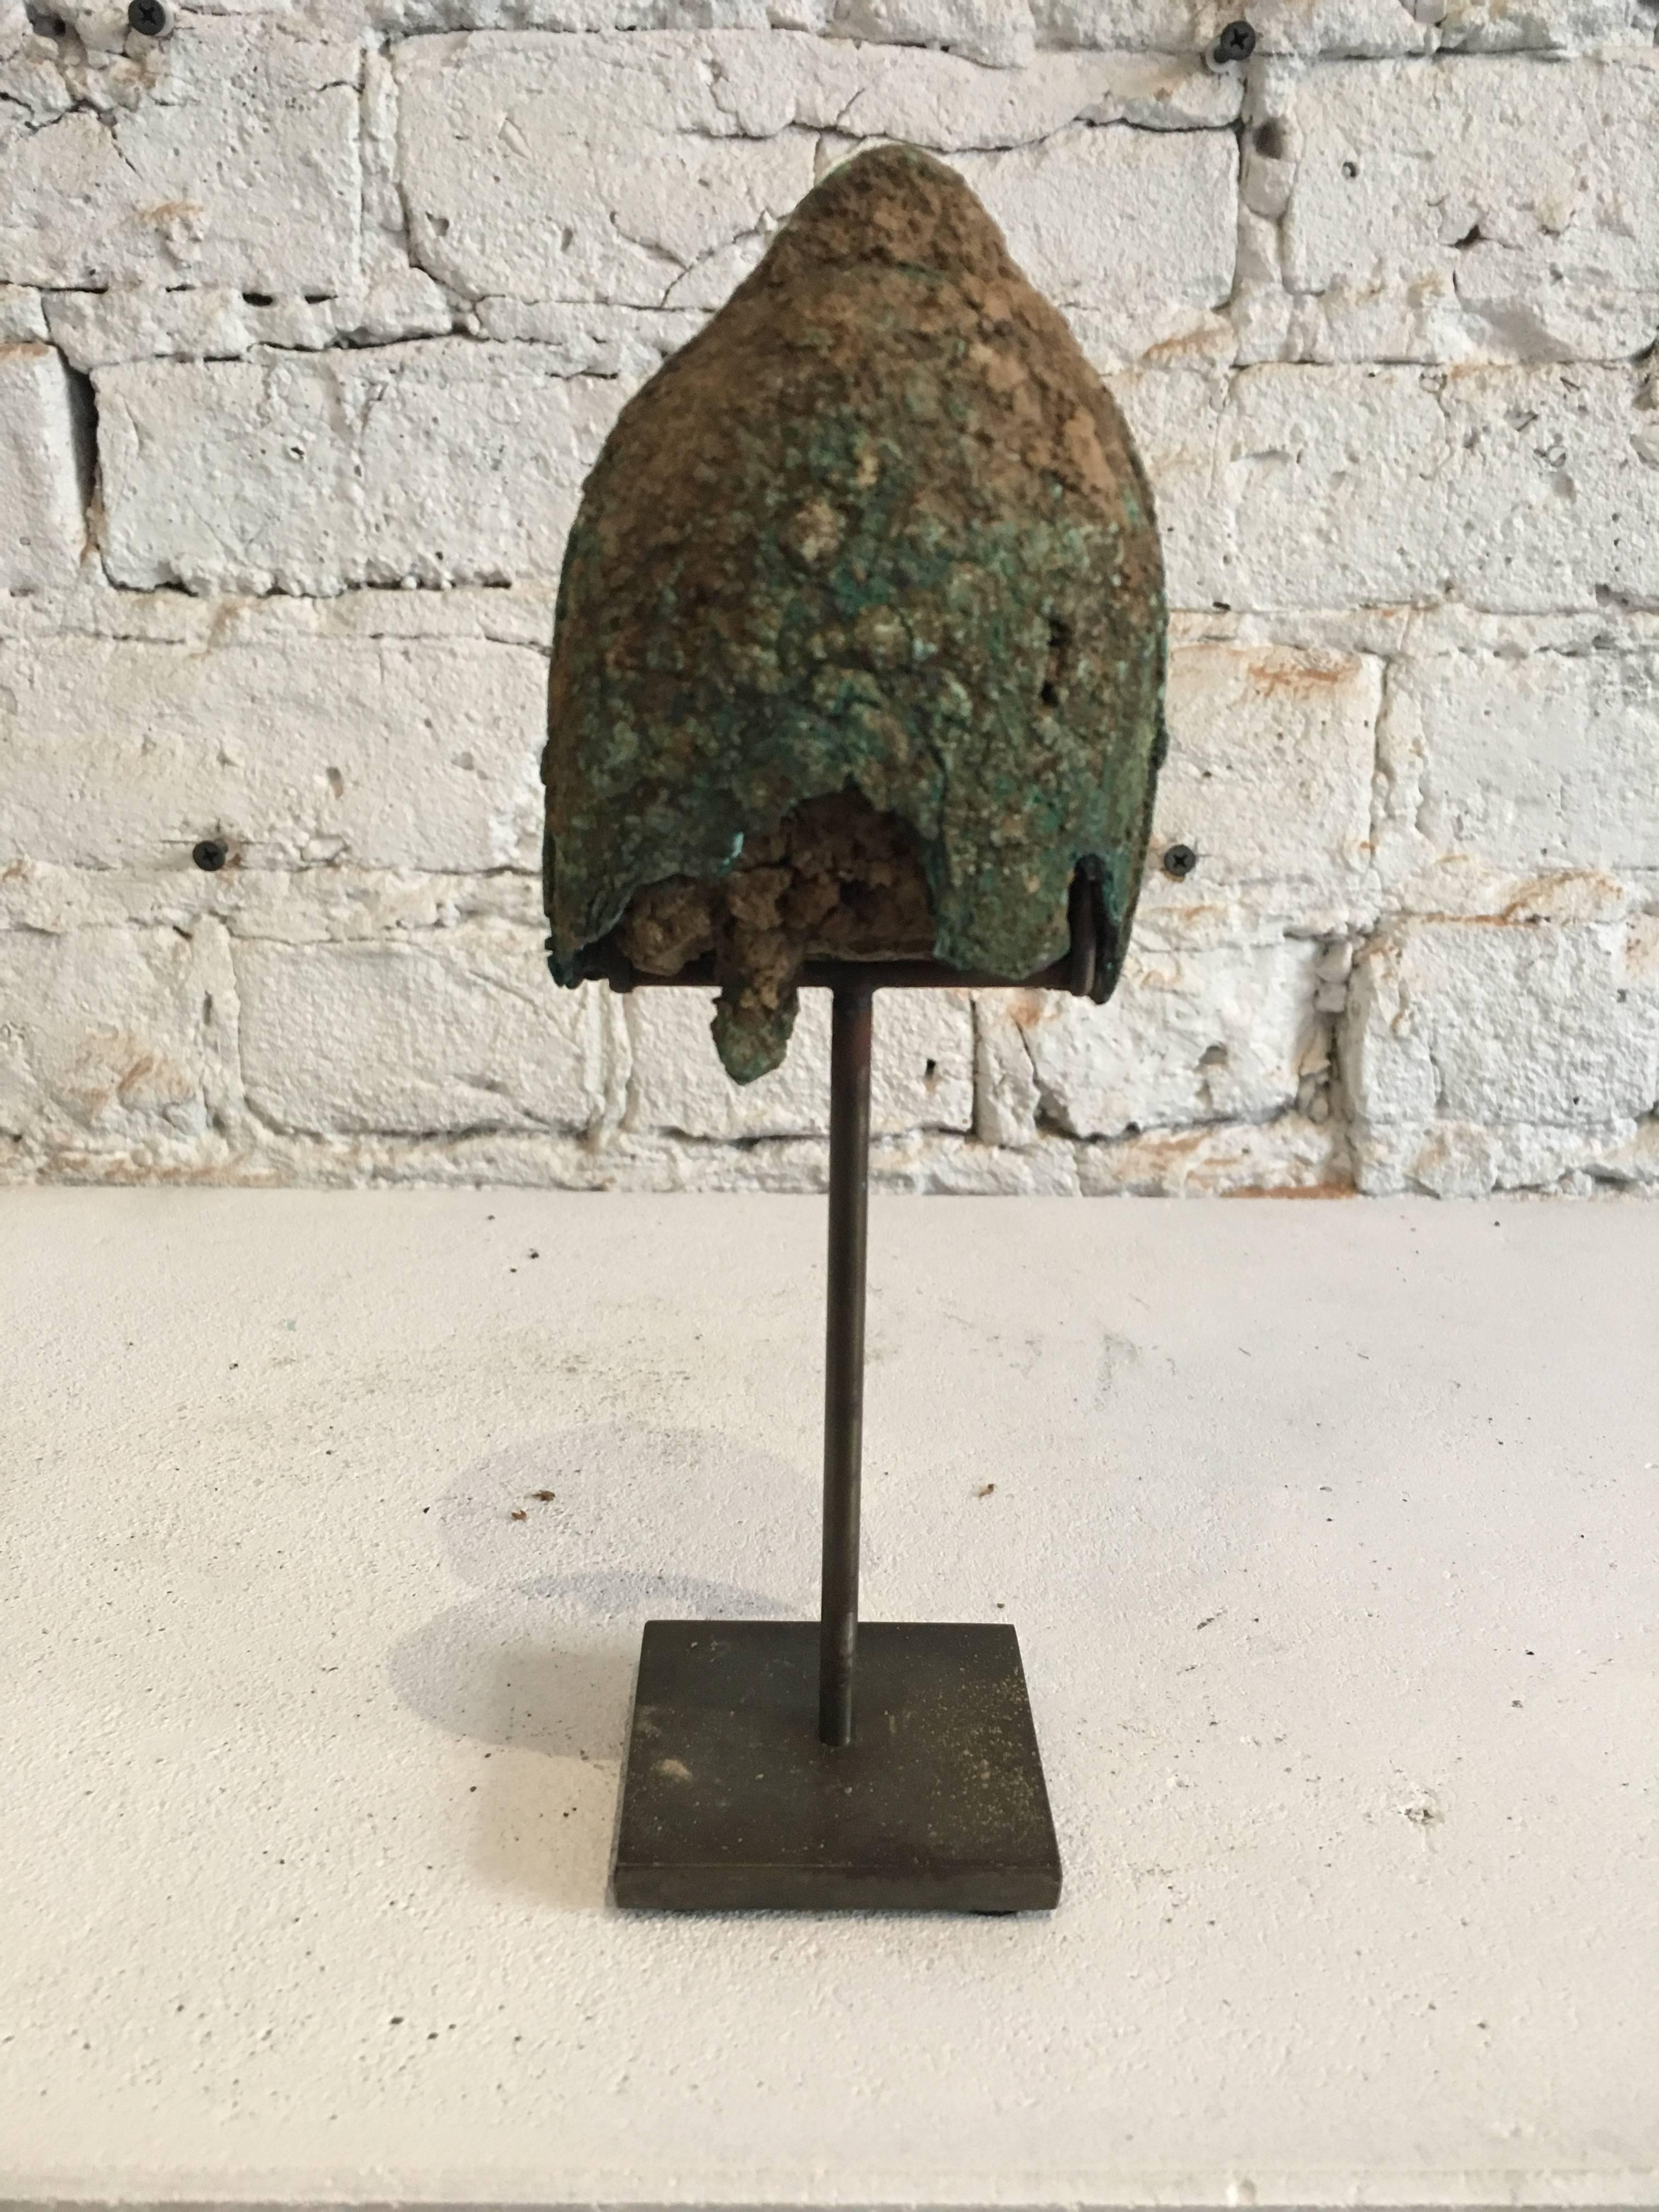 18th century (or earlier) bell excavated from the Central Highlands Vietnam
Mounted for best viewing.